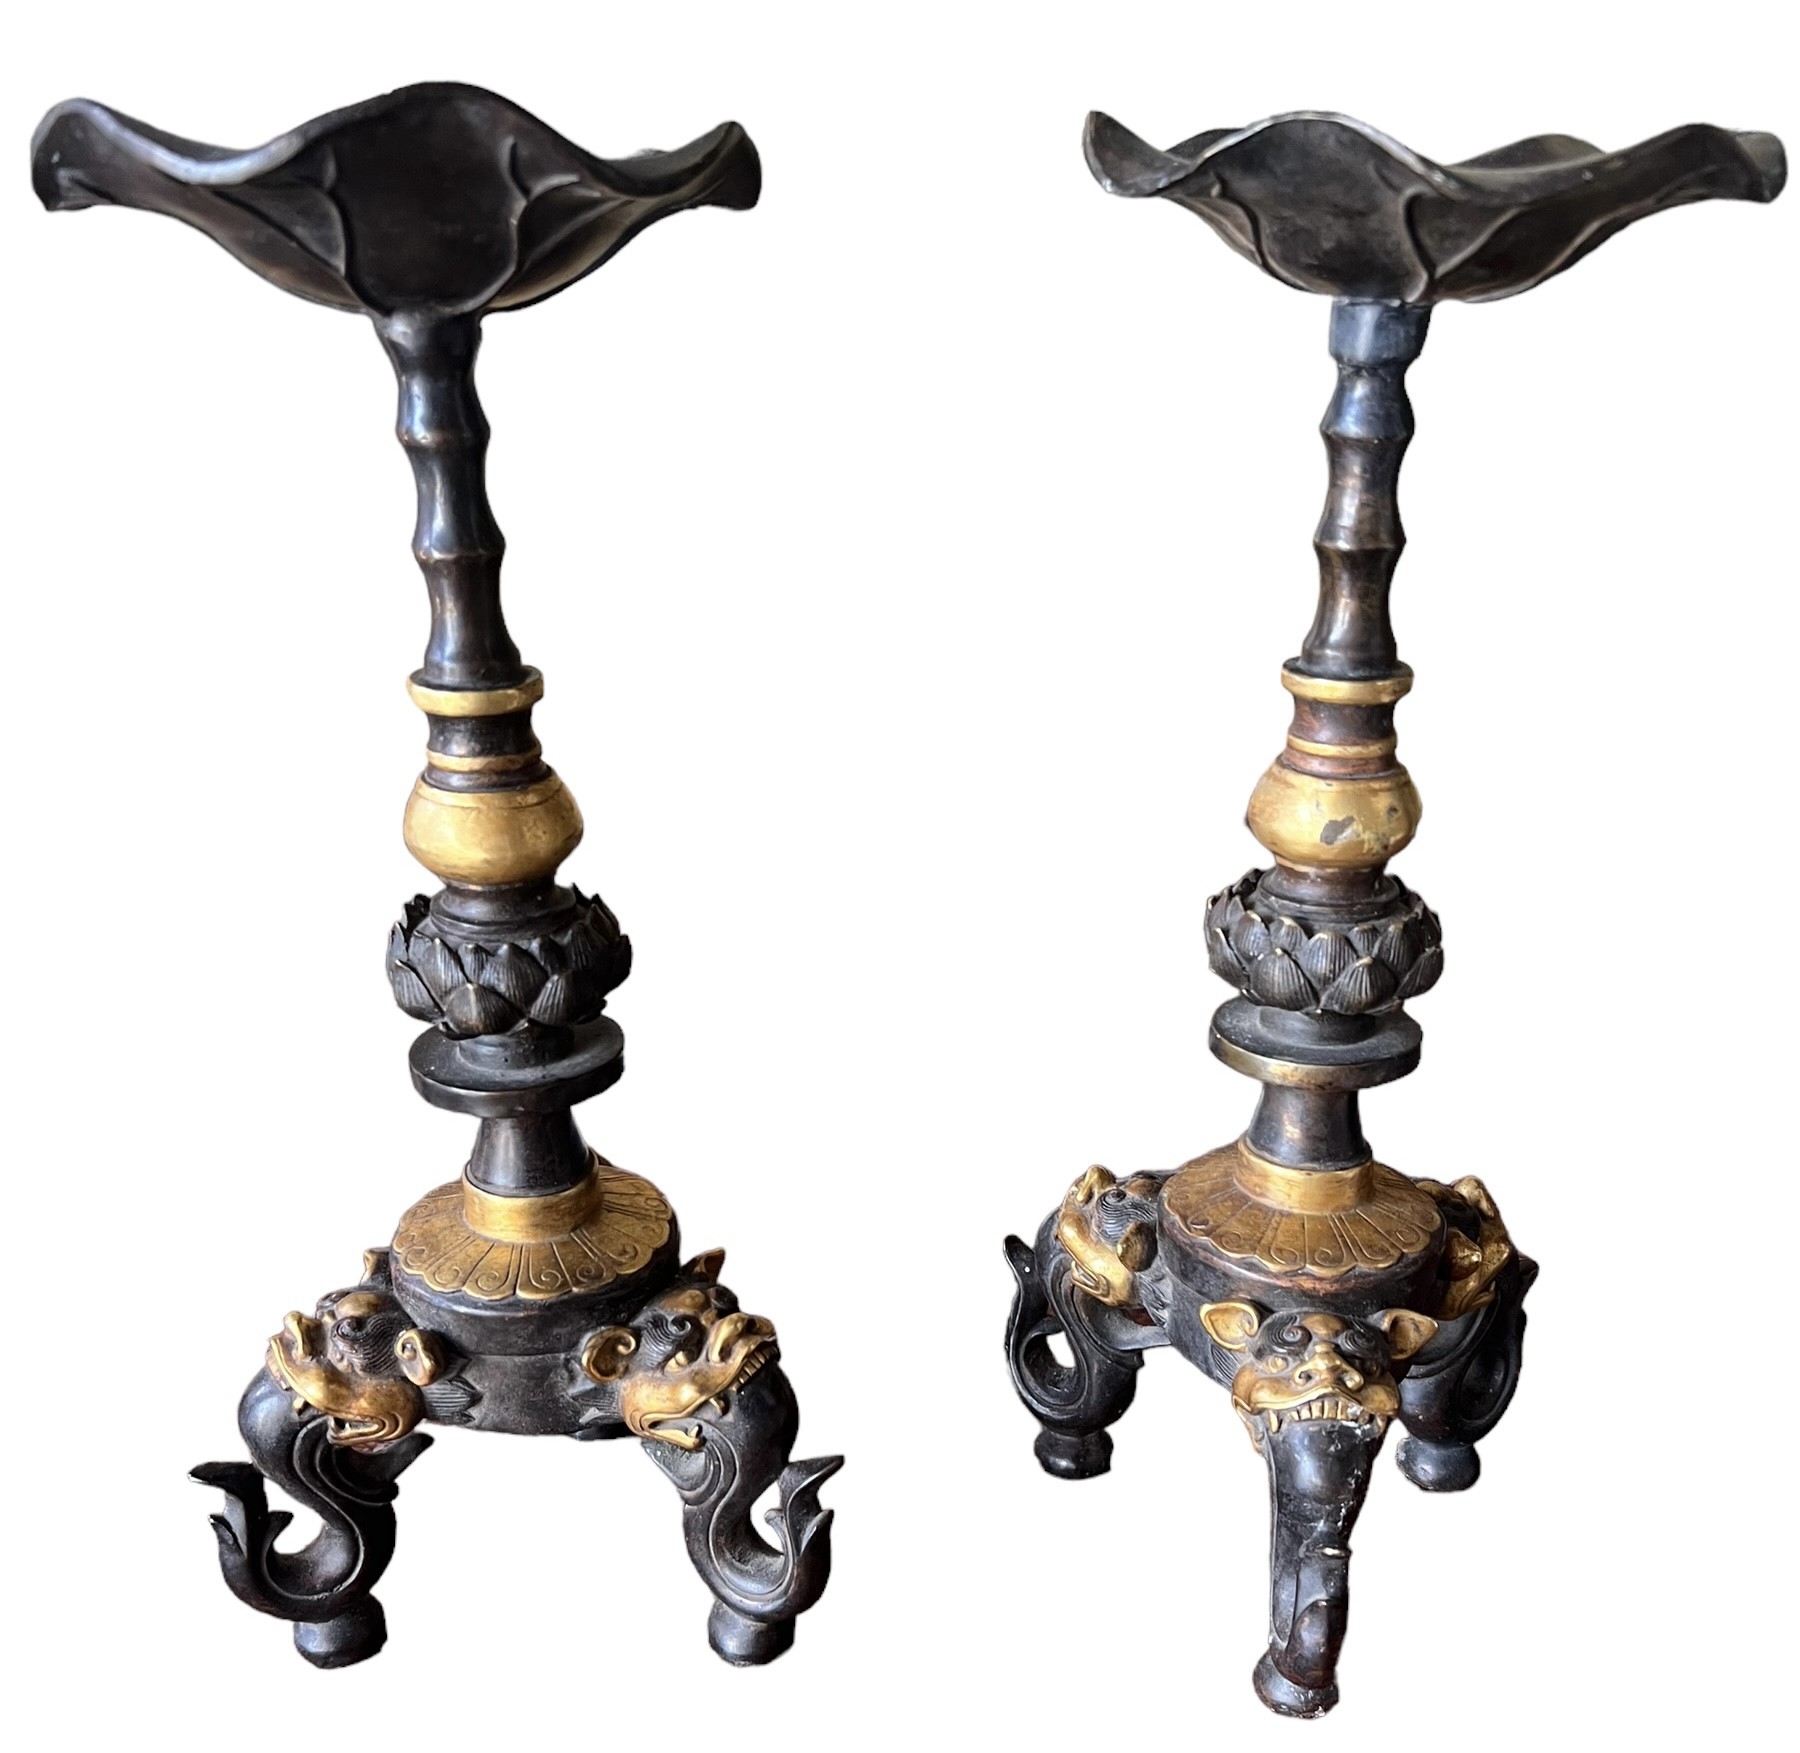 A PAIR OF CHINESE GILT BRONZE TABLE PRICKET STANDS The columns decorated with Lotus Leaf above three